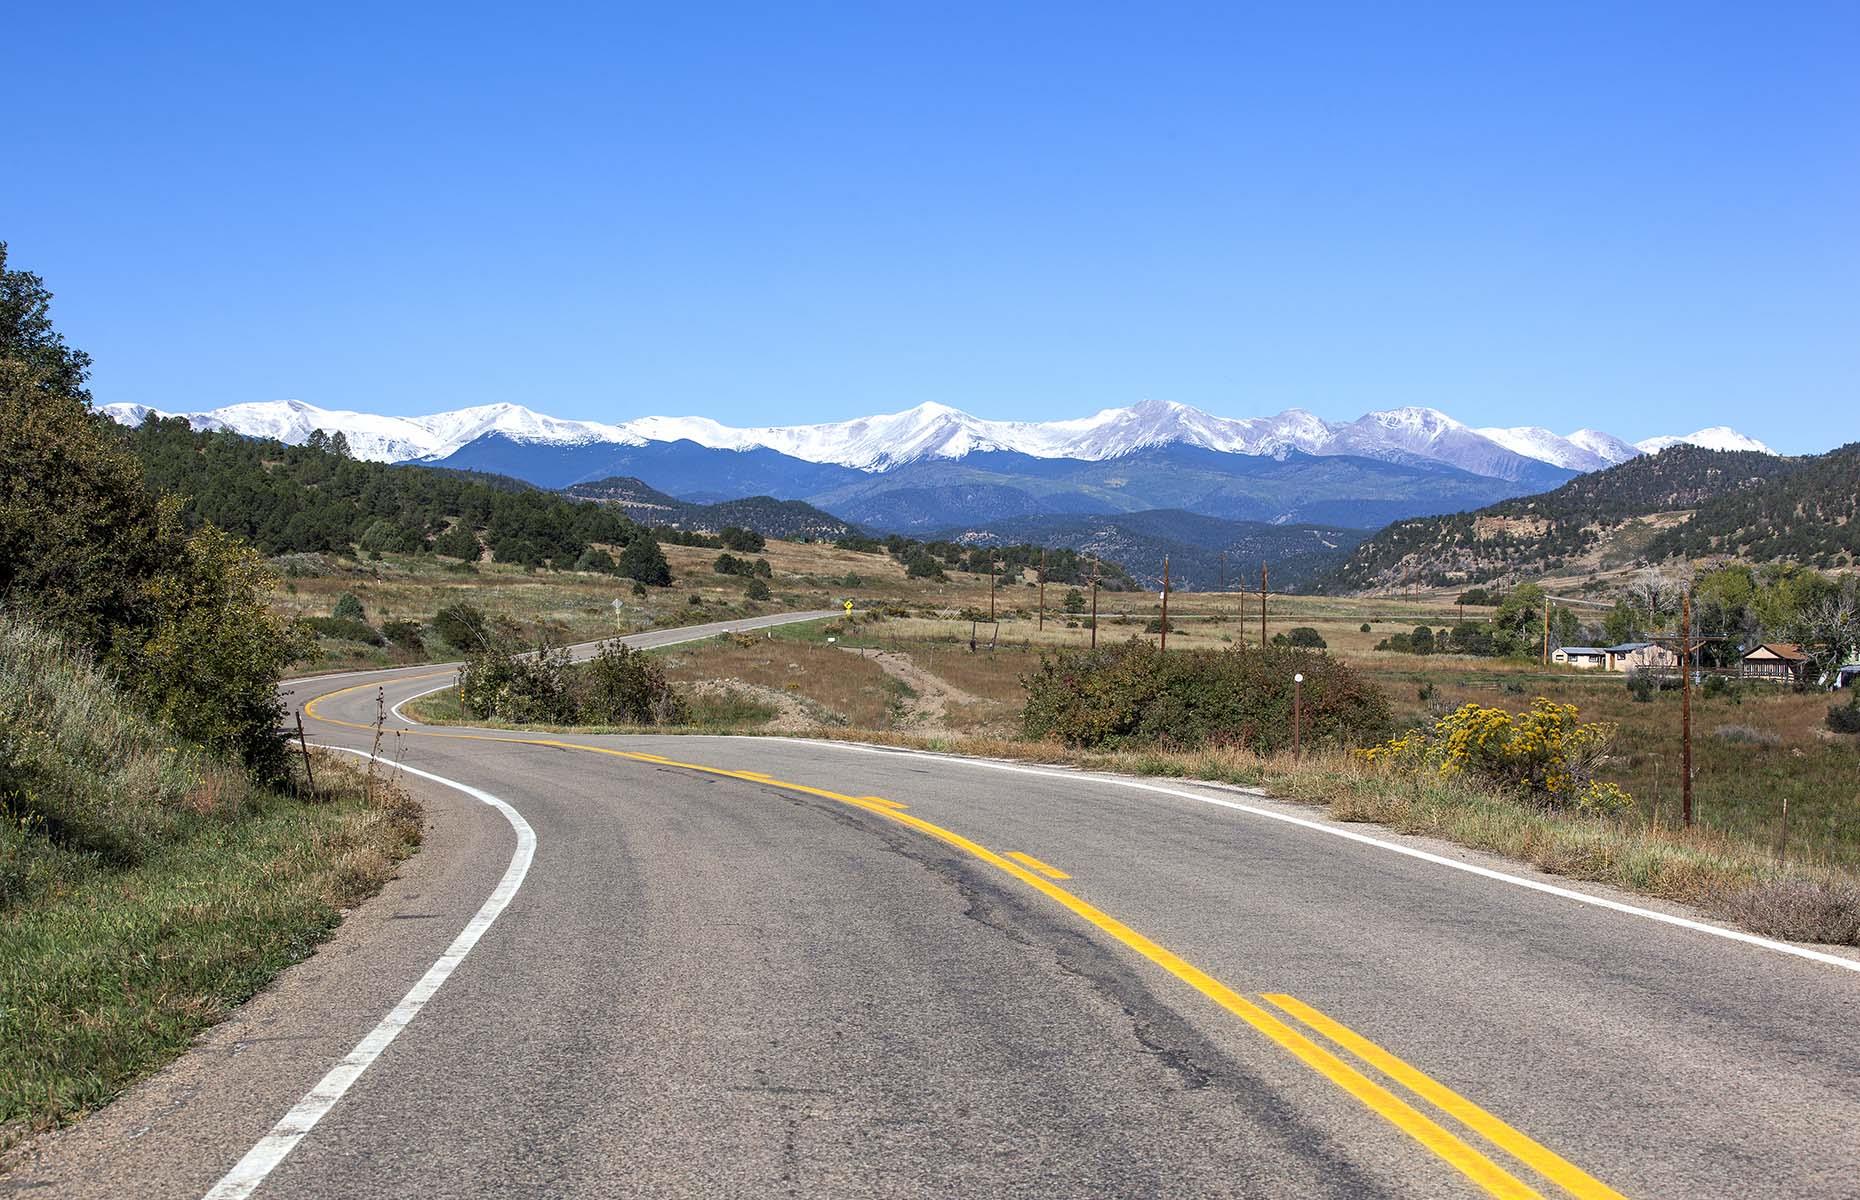 <p>Ancient indigenous myths, checkered pasts of Spanish conquistadors and troubled lives of gold prospectors are all part of the fabric of the land that surrounds <a href="https://www.colorado.com/articles/colorado-scenic-byway-highway-legends">this scenic byway</a> in southern Colorado. Also known as State Highway 12, the road stretches from La Veta to Trinidad for 82 gorgeous miles (132km) of steep mountain passes and valleys, forests and historic sites. And when the driving's done, Trinidad is a relaxing resort town with stunning Victorian architecture and some of the state's best fishing.</p>